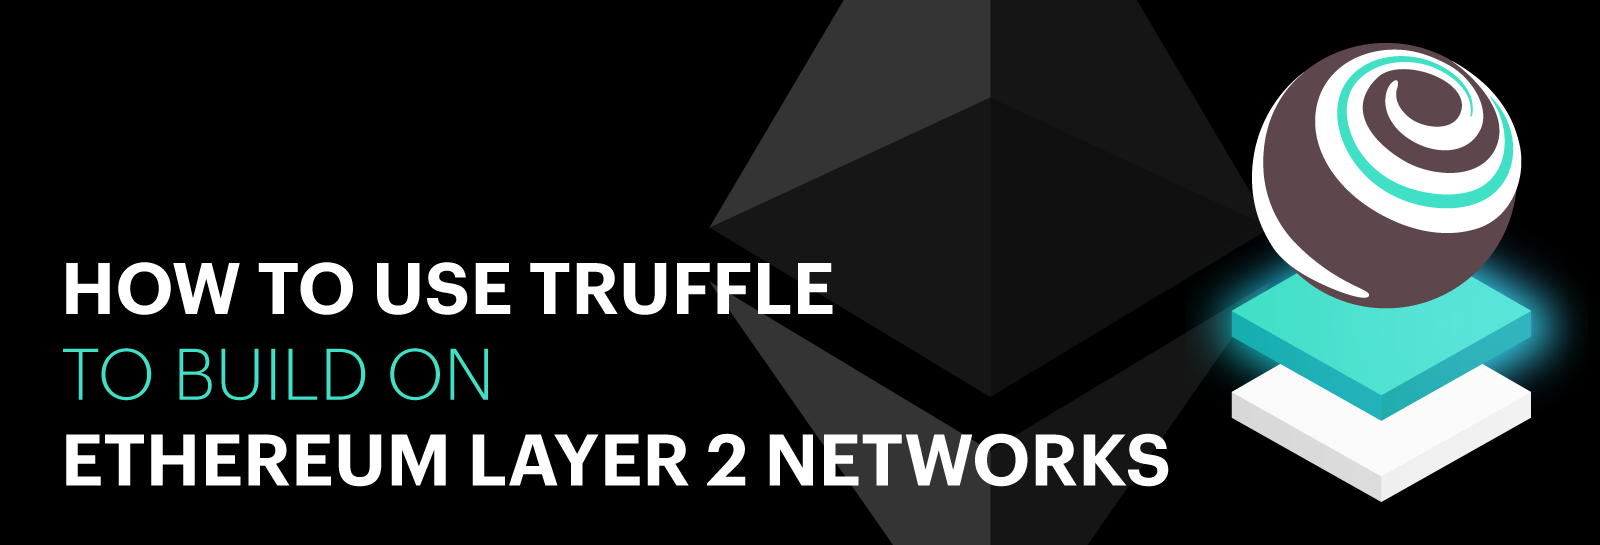 How to use Truffle to build on Ethereum layer 2 networks